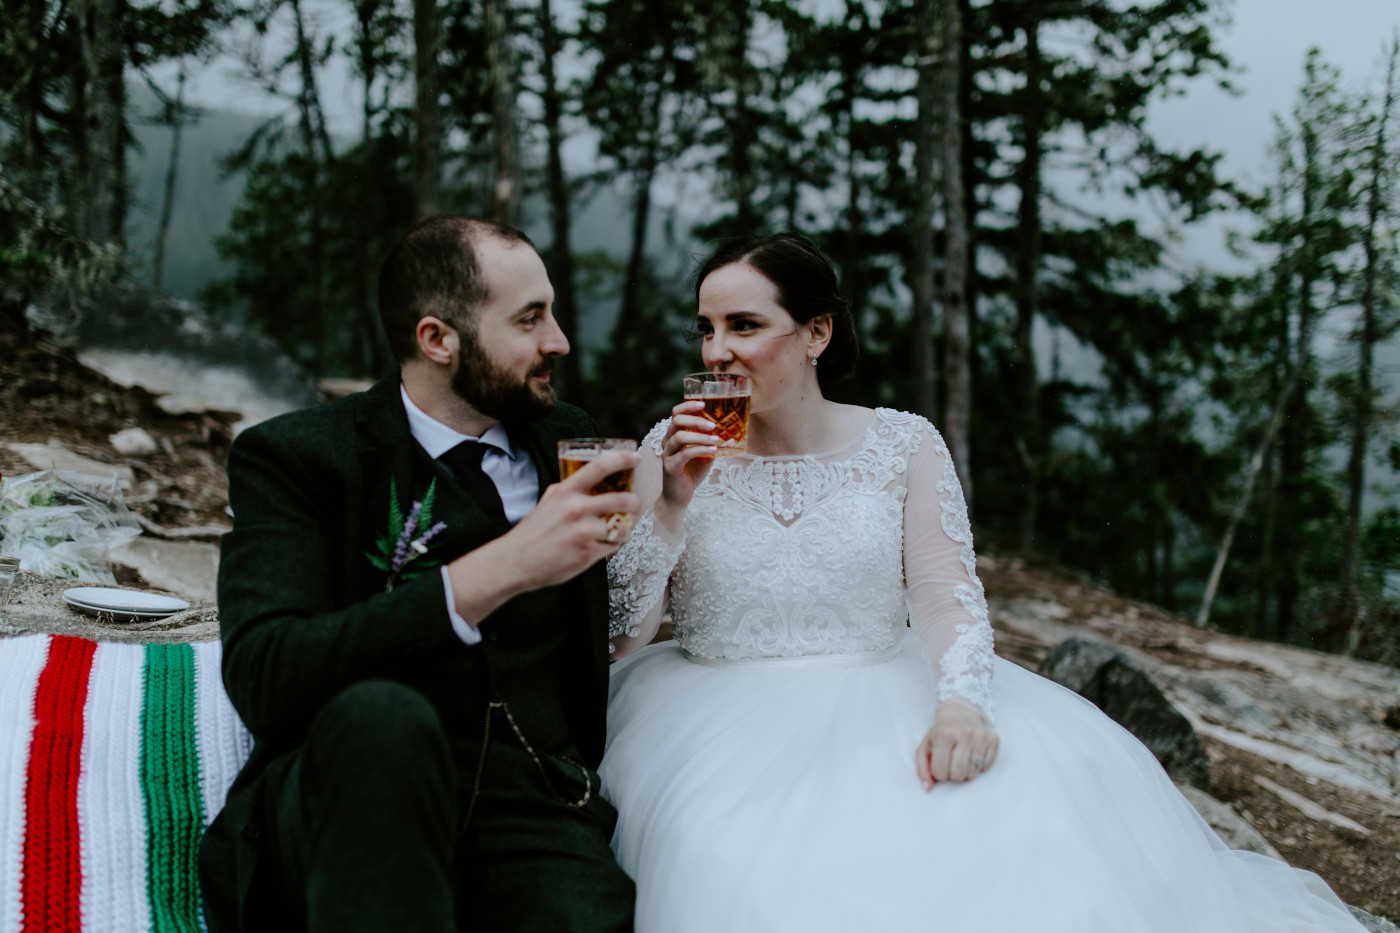 Elizabeth and Alex make their drinks. Elopement photography at North Cascades National Park by Sienna Plus Josh.